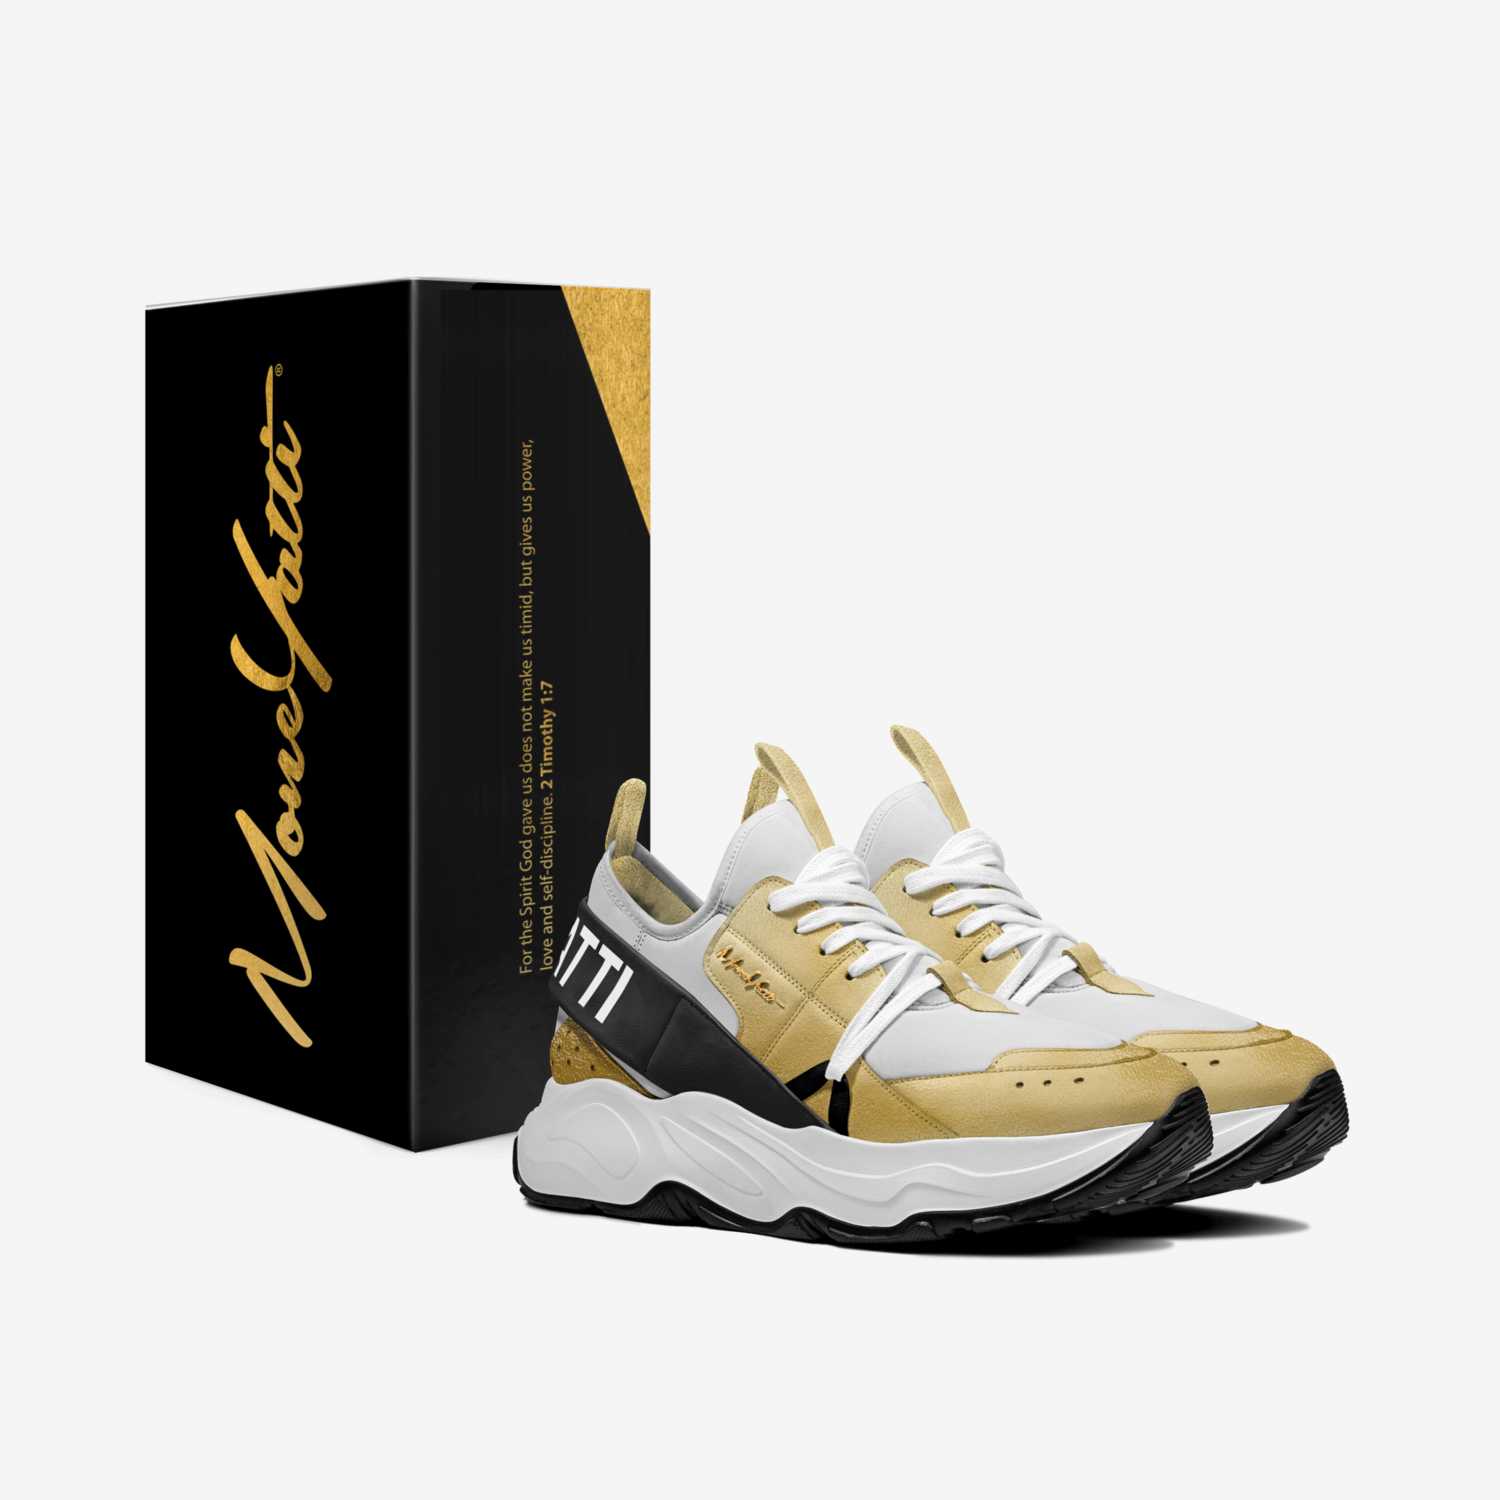 VICTORY GOLD custom made in Italy shoes by Moneyatti Brand | Box view